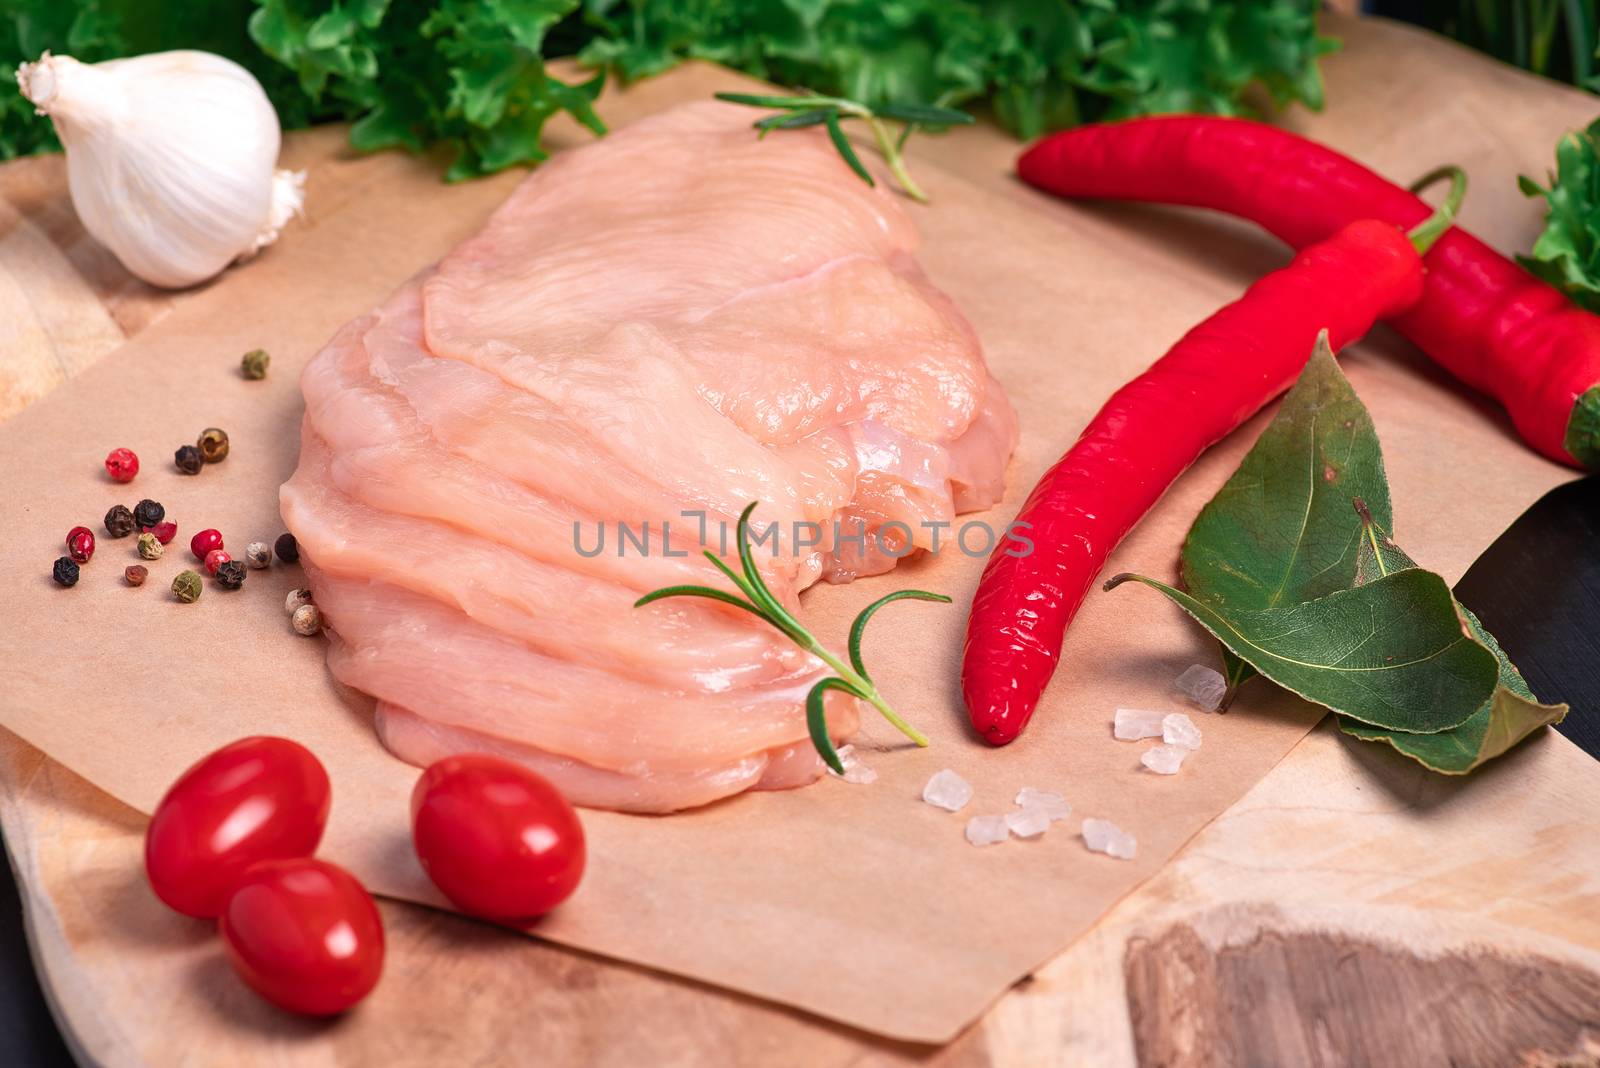 Raw chicken slices on a wooden table with raw vegetables and spices. Satilisimo. Close-up view of raw, fresh, choped and sliced chicken meat. Cooking,raw sliced chicken breast.Top view. by nkooume